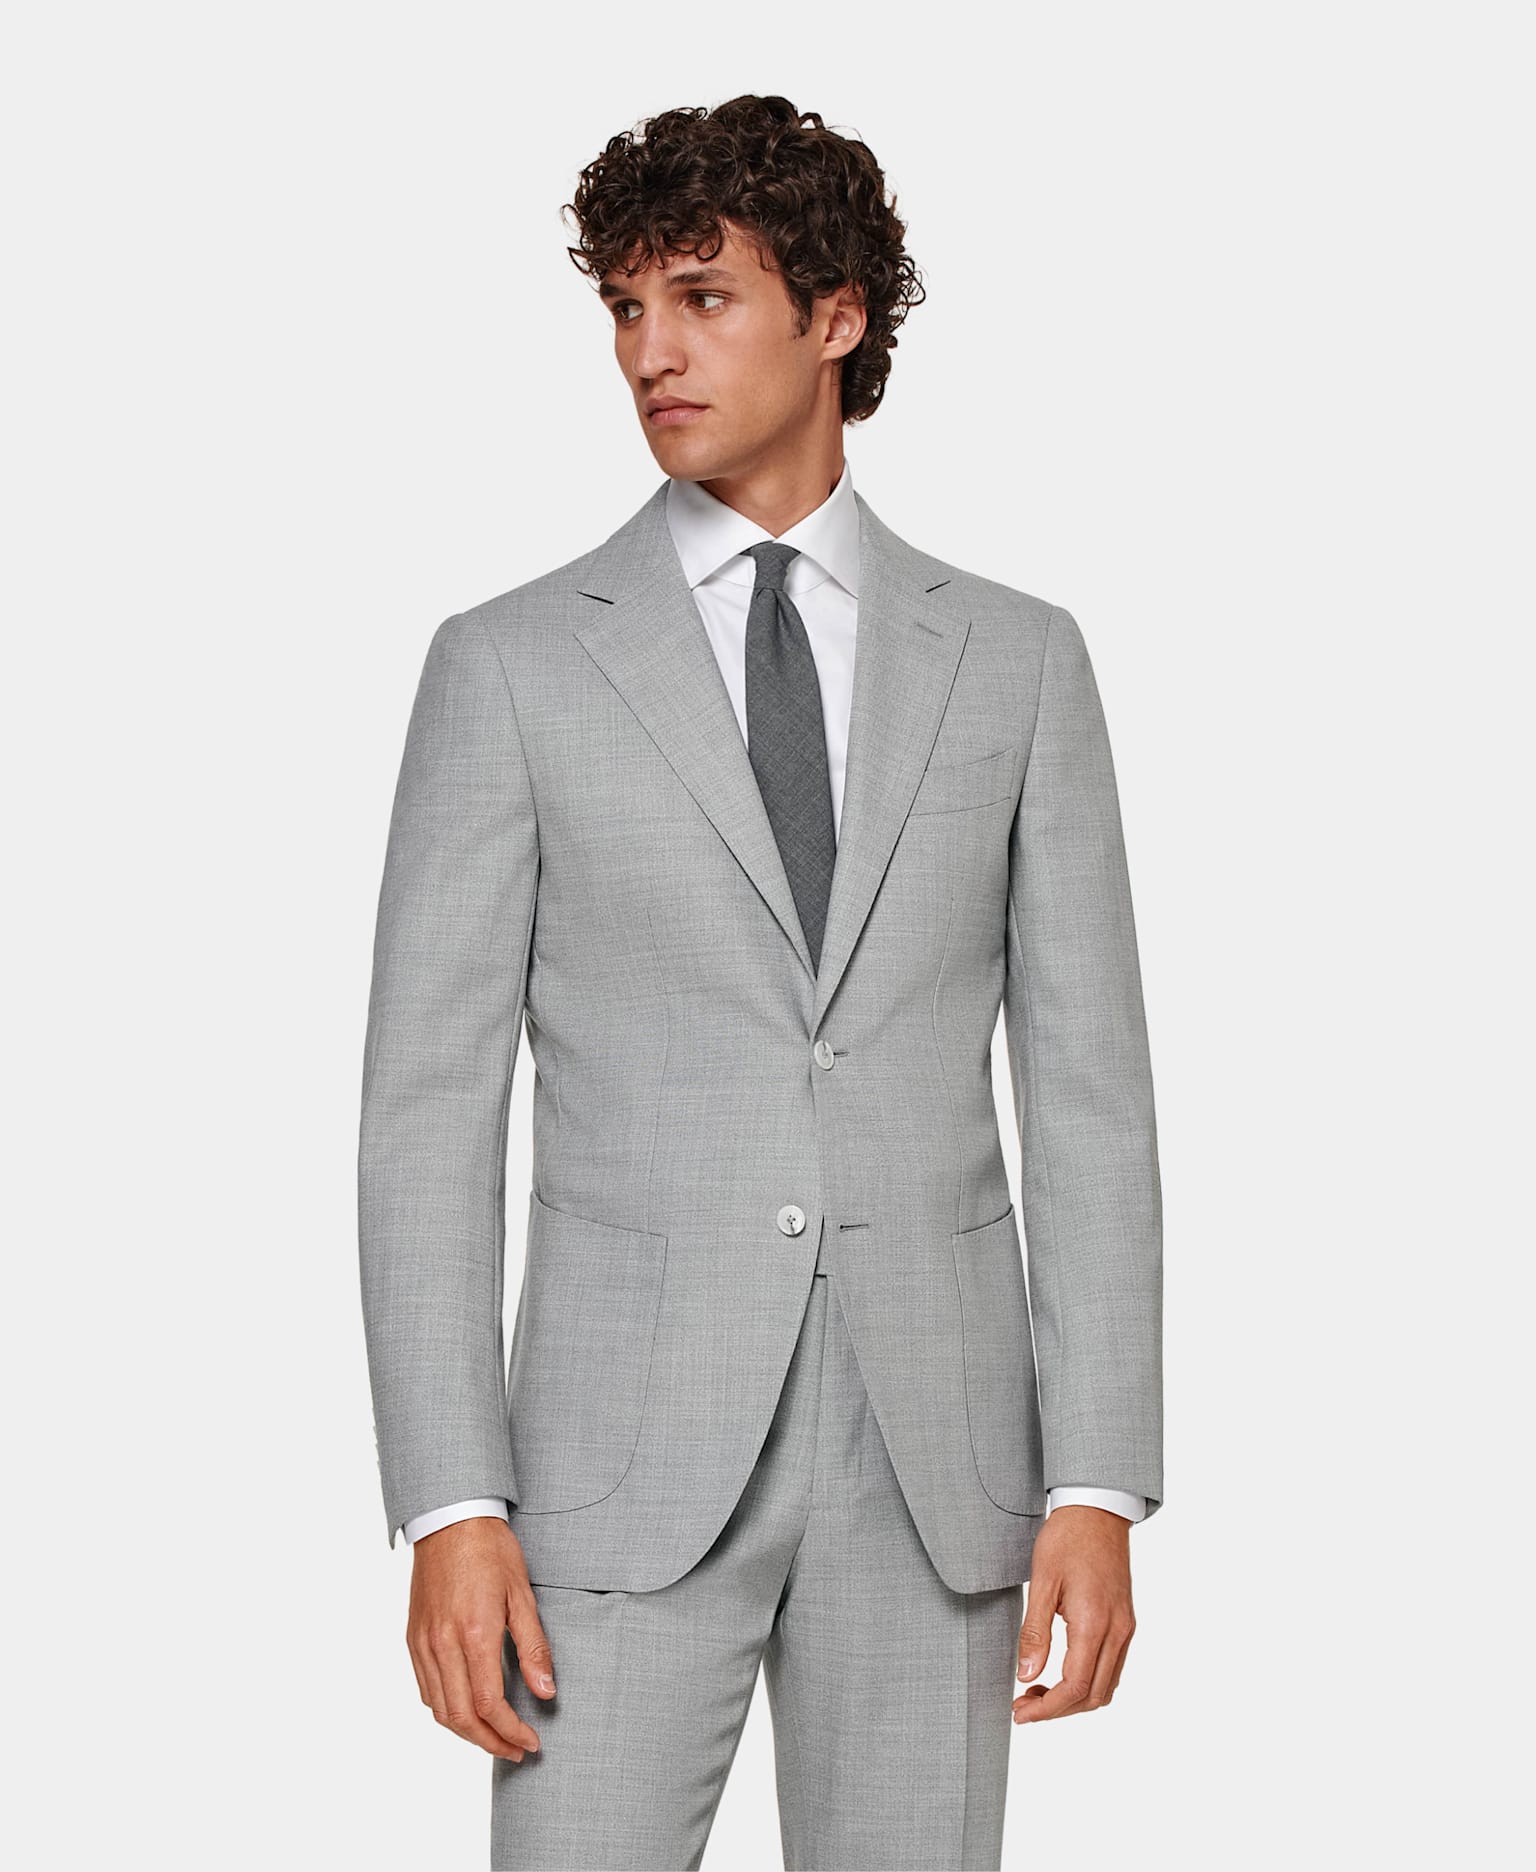 Grey suit with patch pockets, worn with white shirt and grey tie